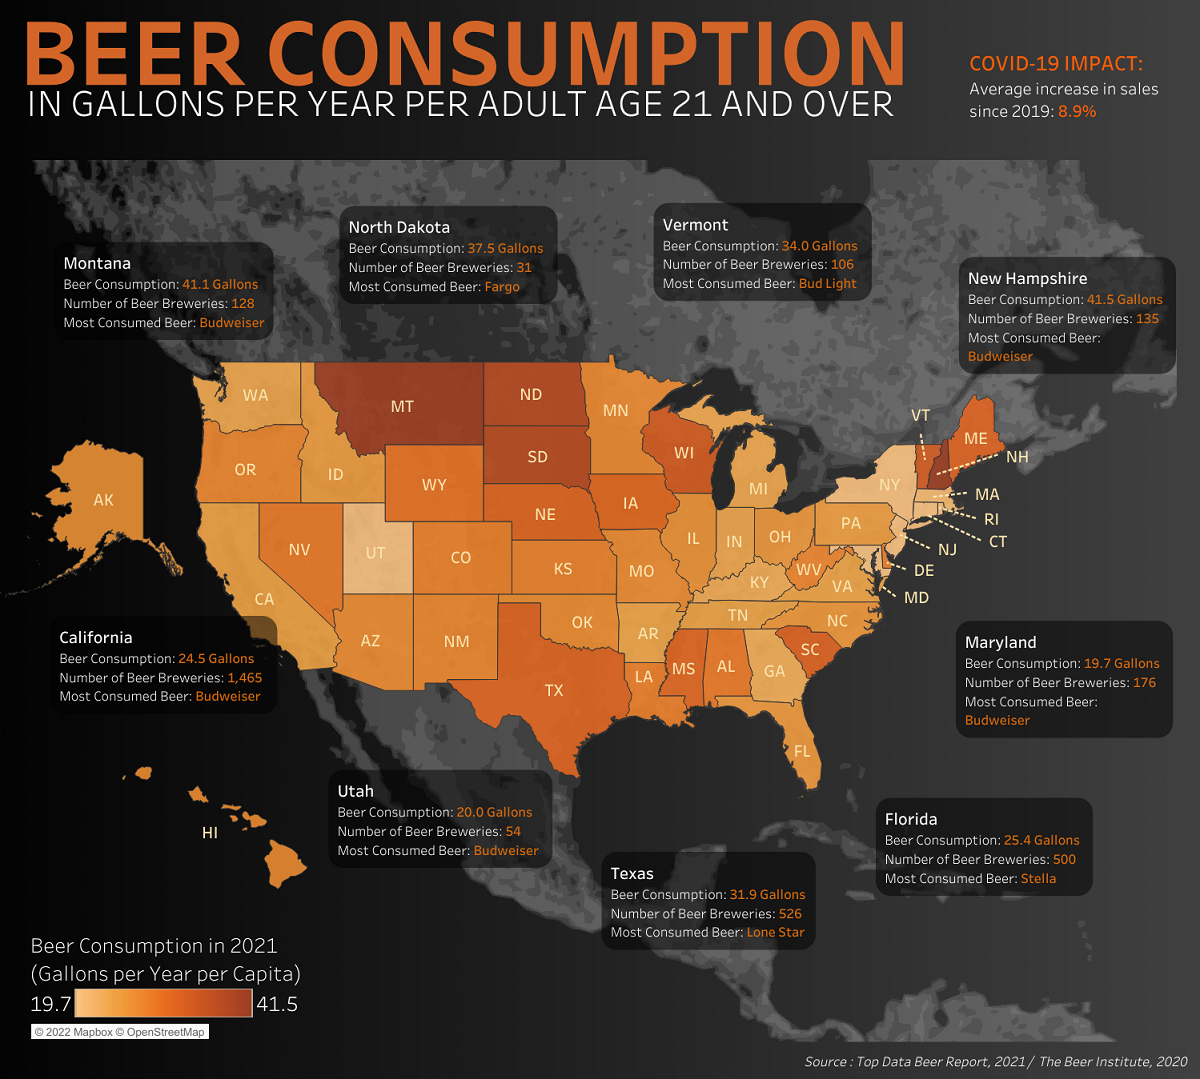  This visualization maps the consumption of beer by gallon across the U.S.